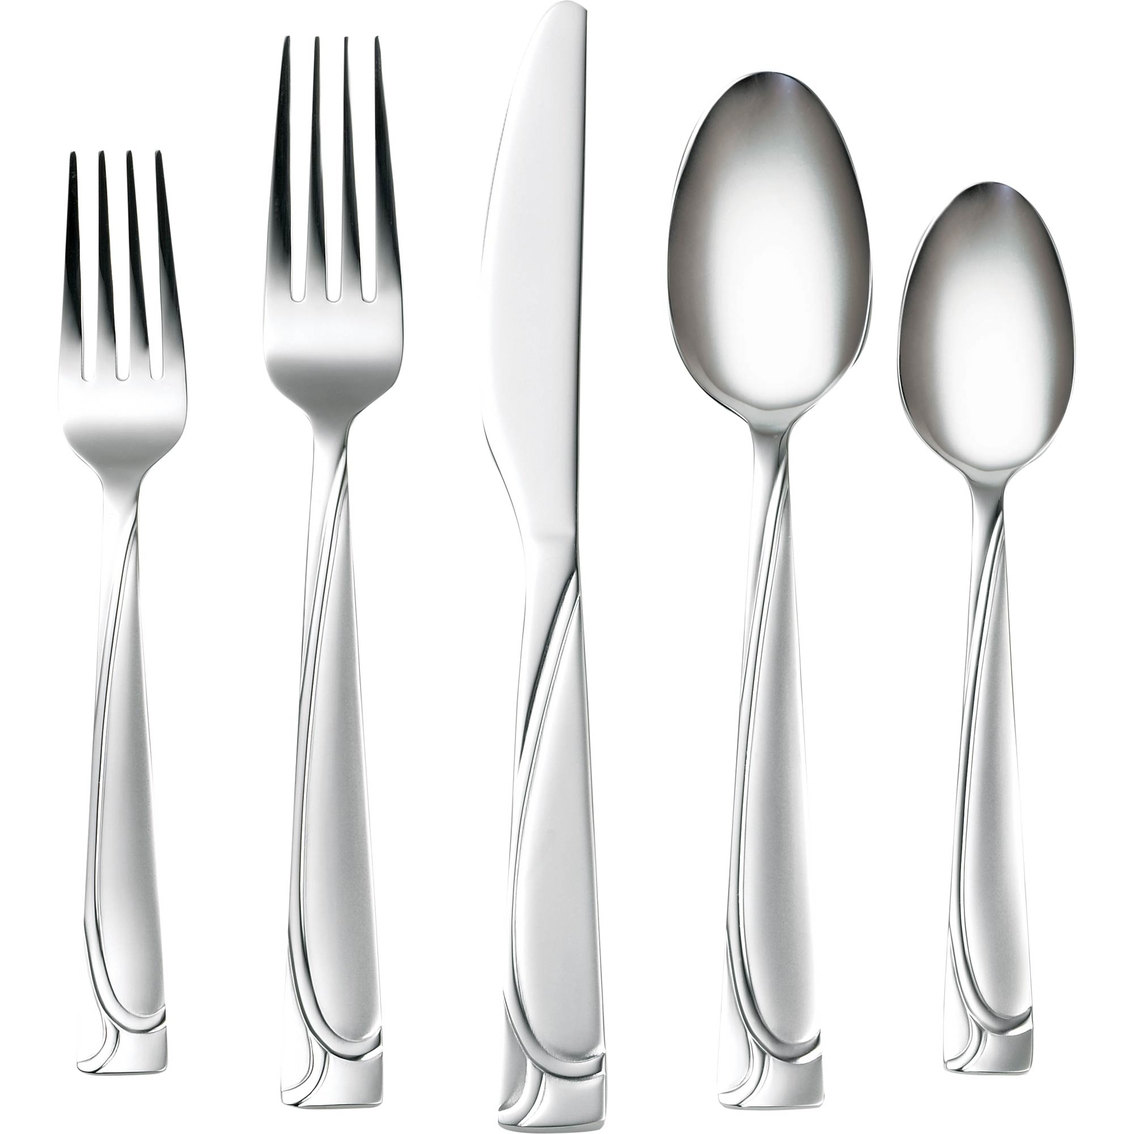 Cambridge Silversmiths Mena Frost 40 pc. Flatware Set with Chrome Buffet - Image 2 of 2